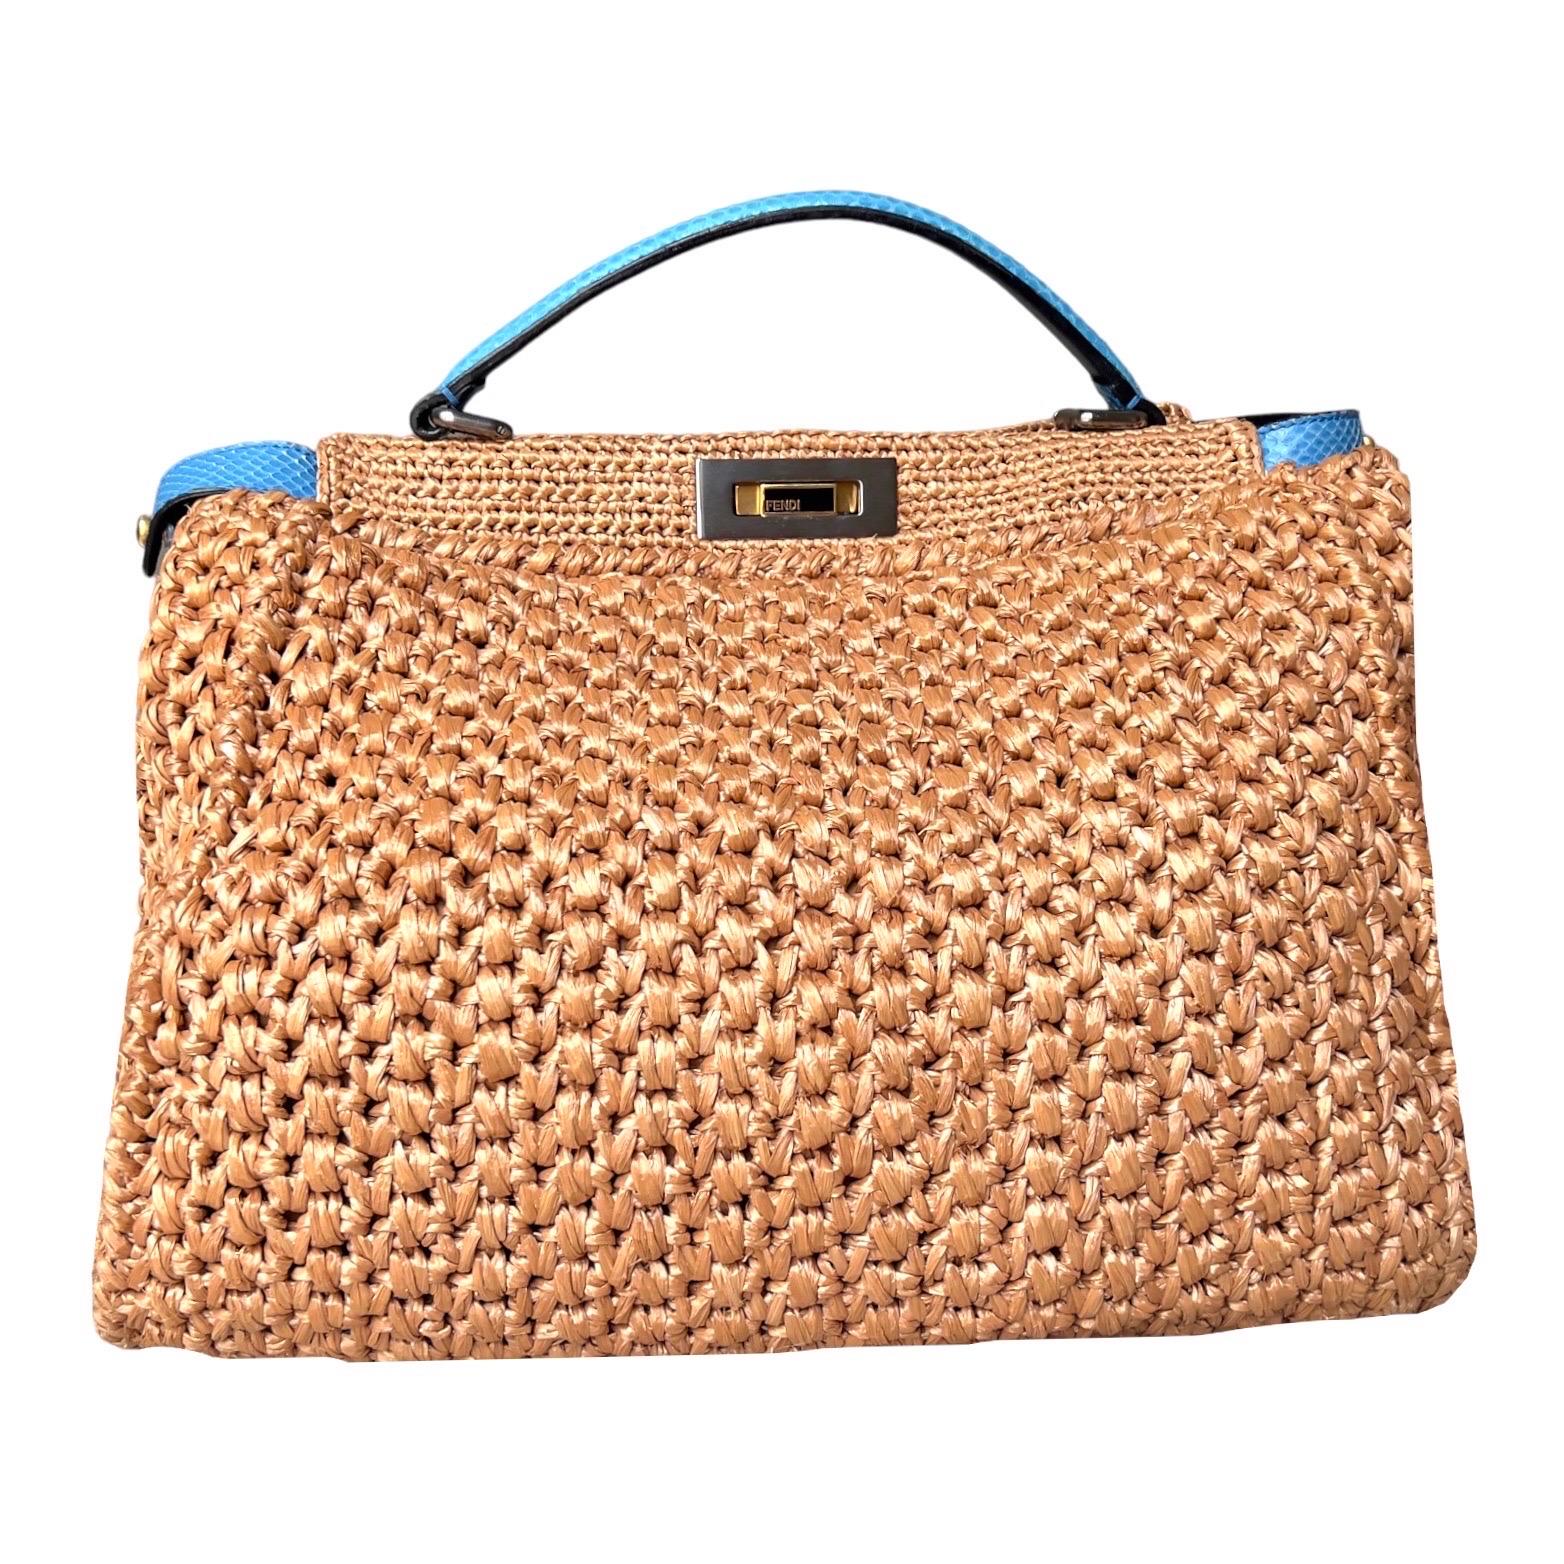 FENDI Exotic XL Woven Peekaboo Raffia Bag Tote with Shoulder Strap In Good Condition For Sale In Switzerland, CH